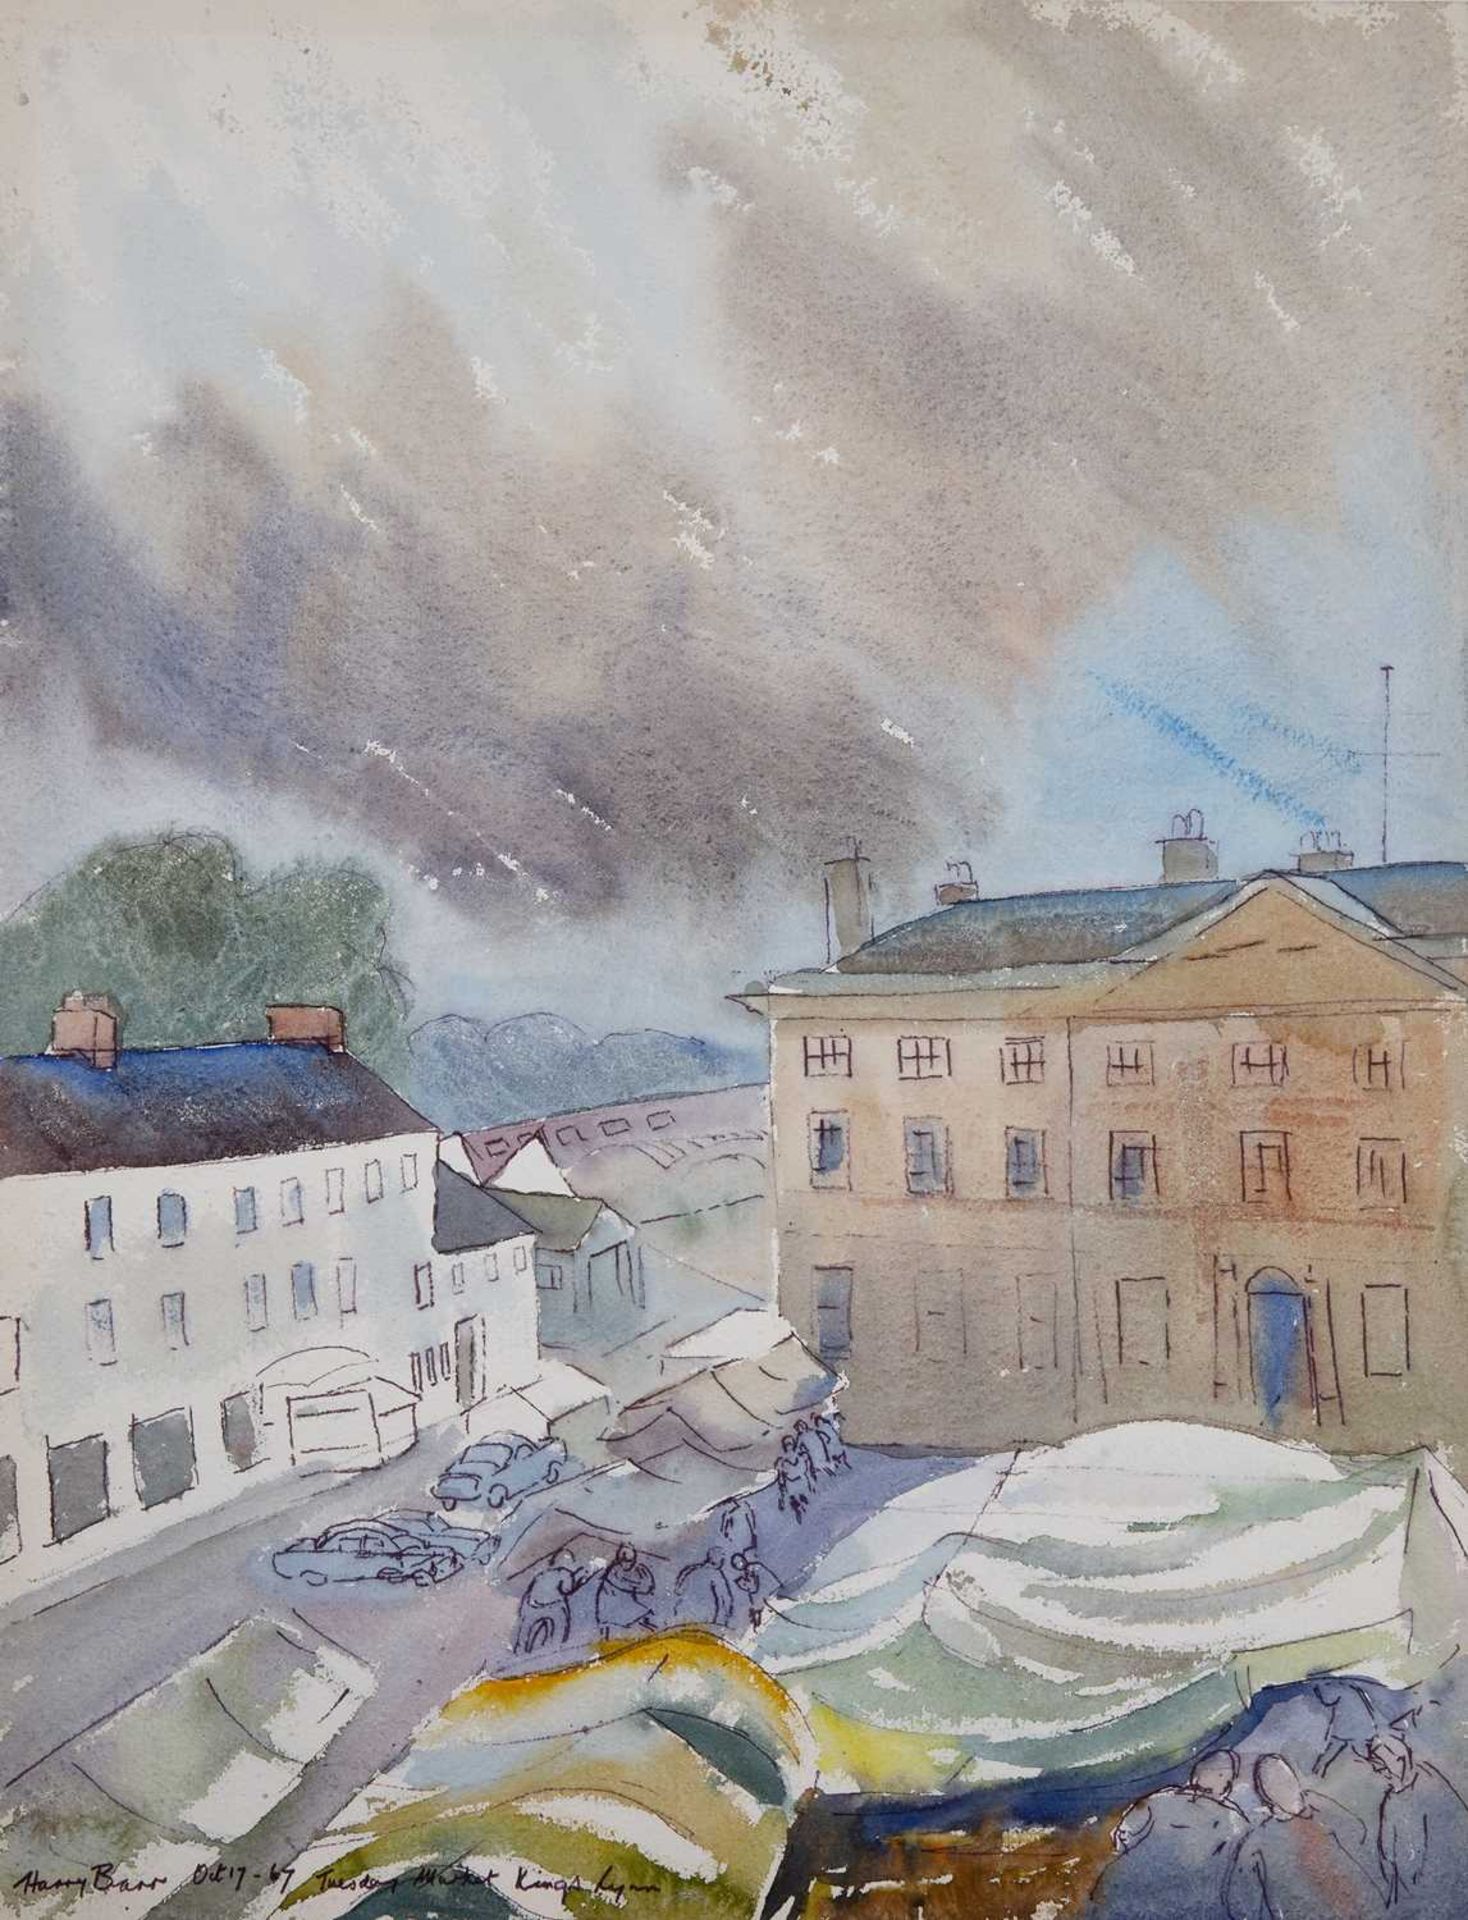 Harry Barr (1896-1987) Tuesday Market, Kings Lynn, signed and dated Oct 17-67 and inscribed, ink and